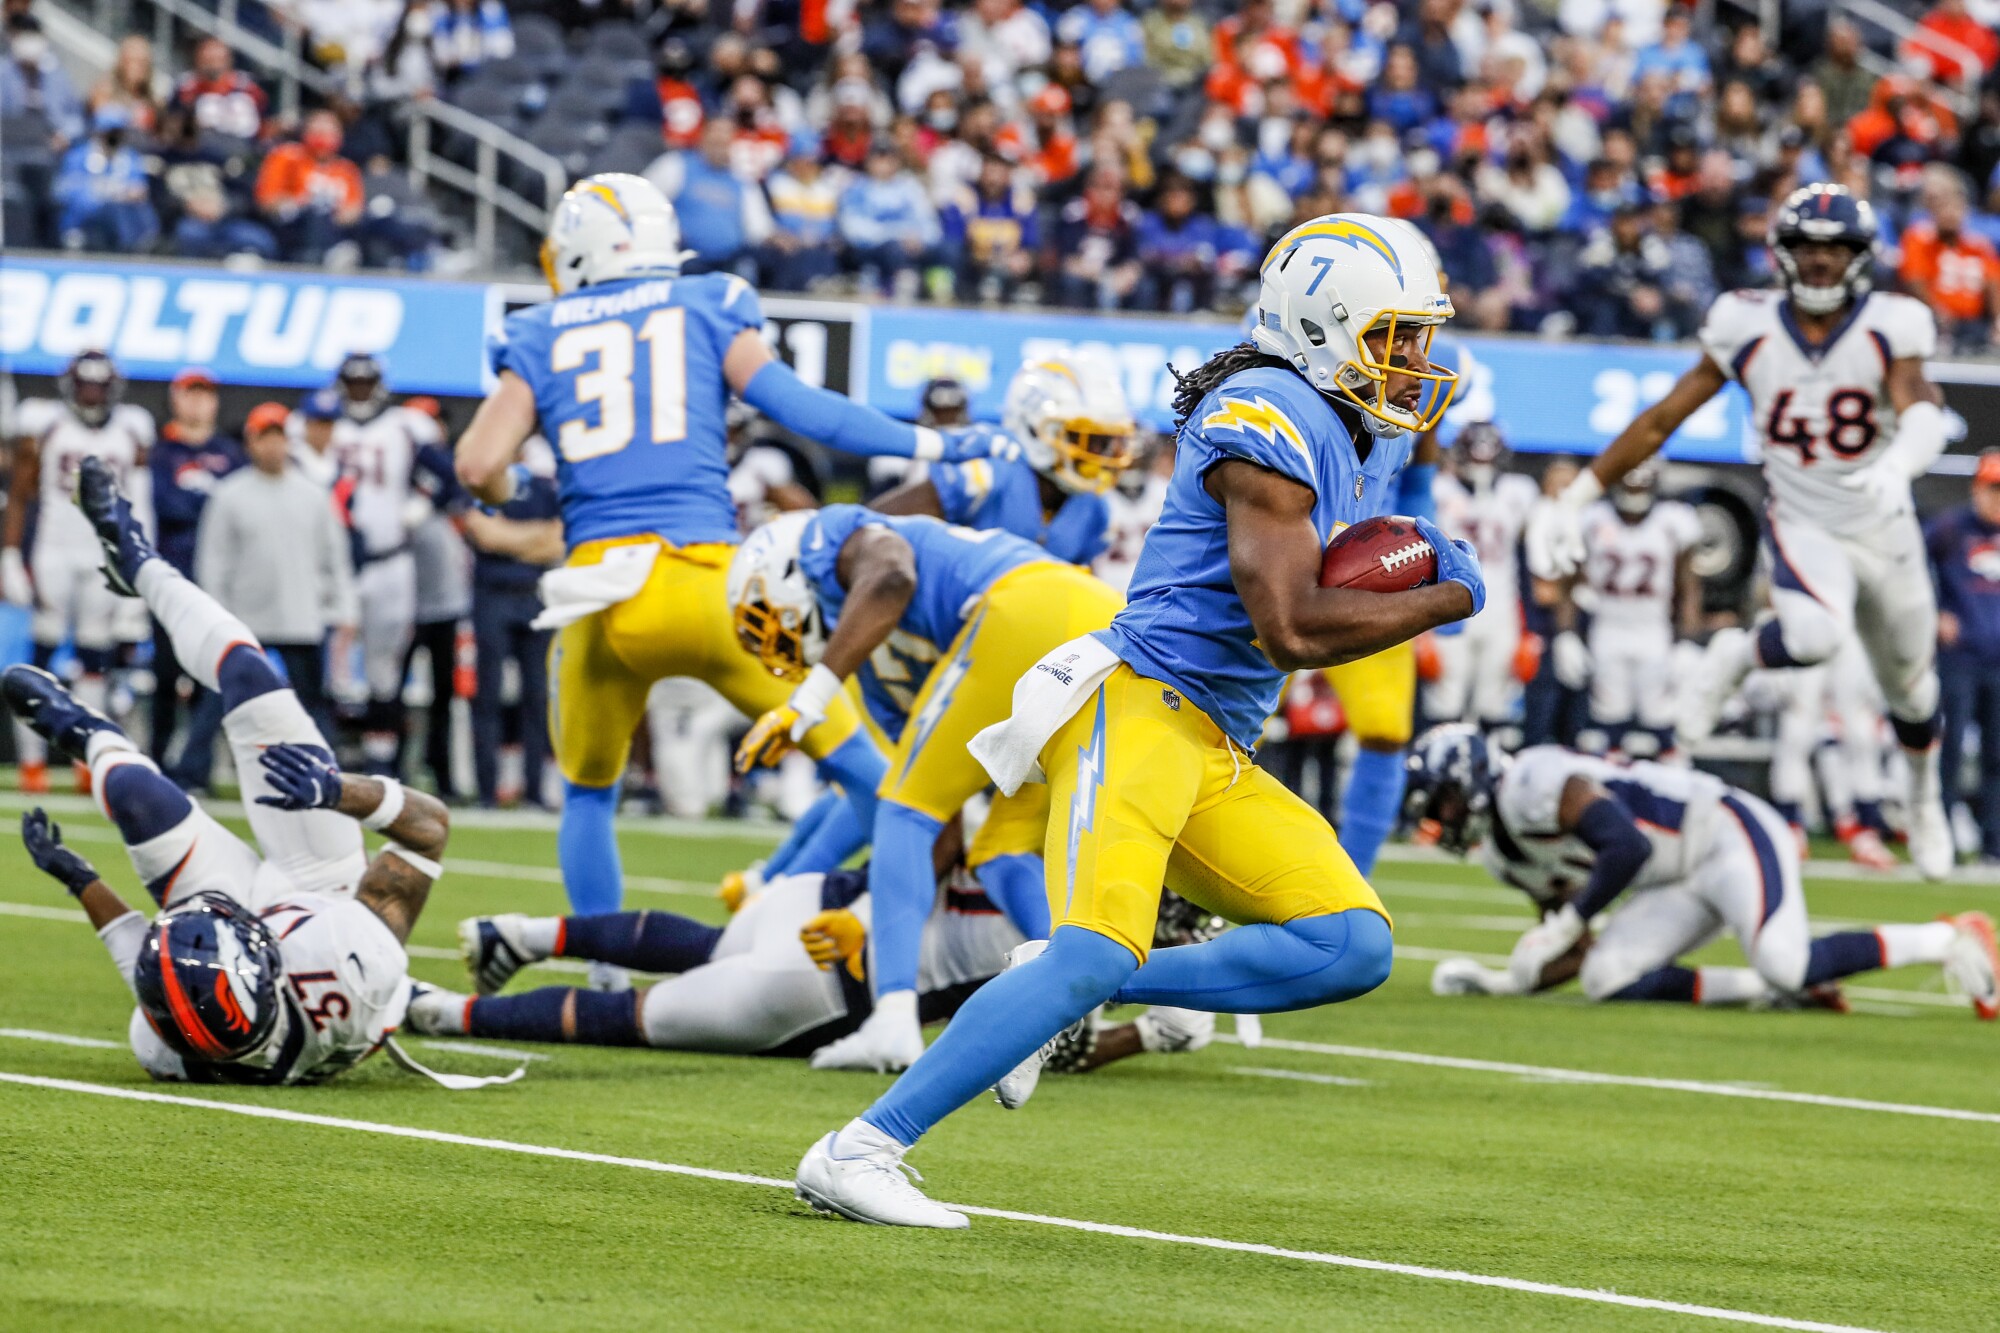 Andre Roberts scores on a 101-yard comeback during the second half for the Chargers.